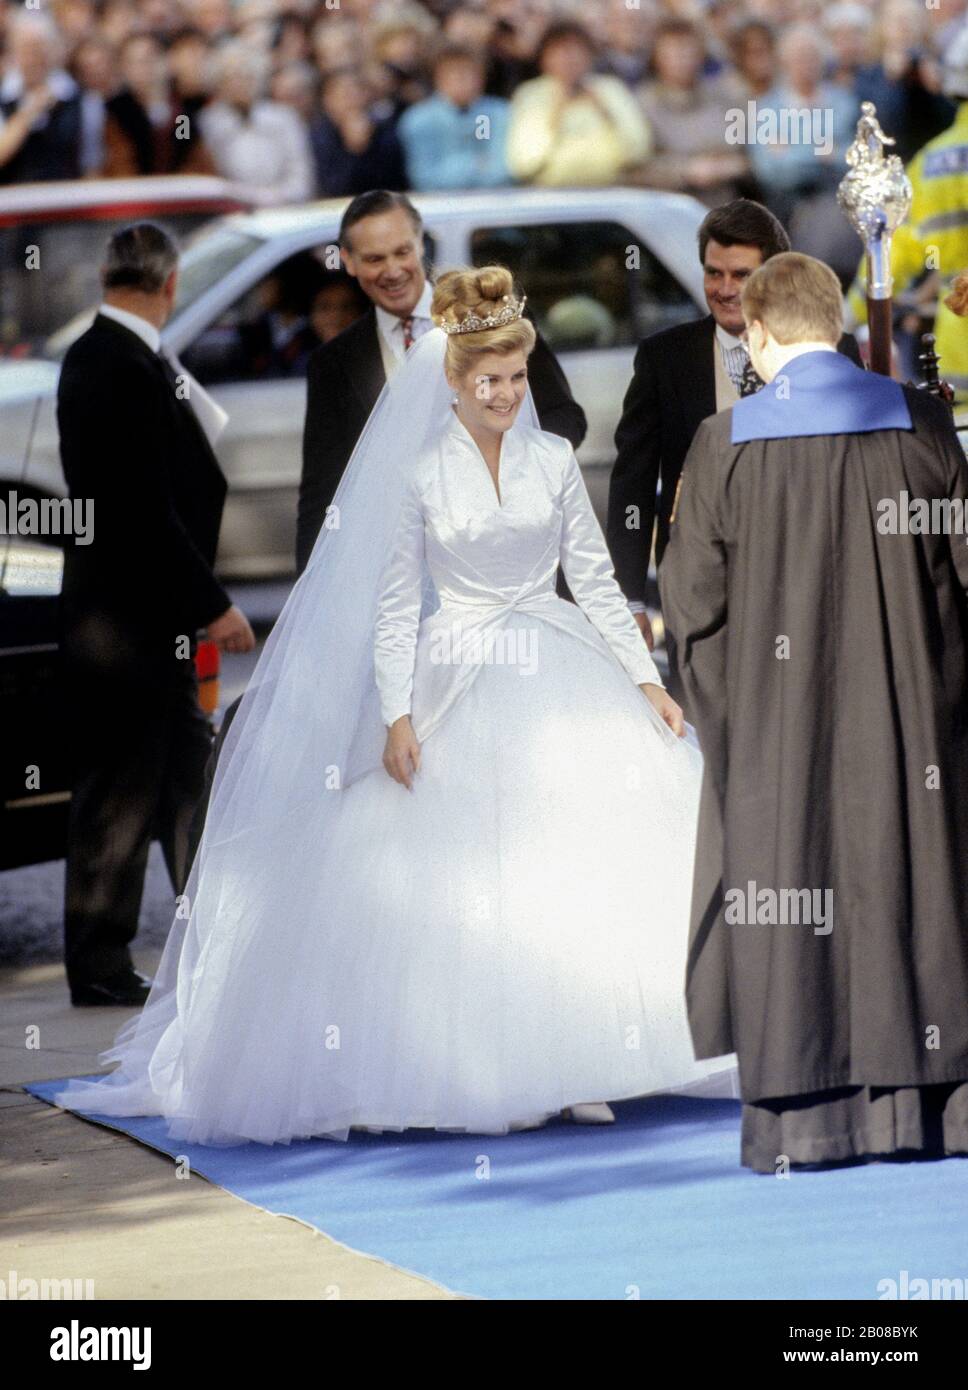 The Hon. Serena Stanhope (now Viscountess Linley) arrives at St Margaret's Church for her marriage to Viscount Linley, London, England 08.10.93 Stock Photo